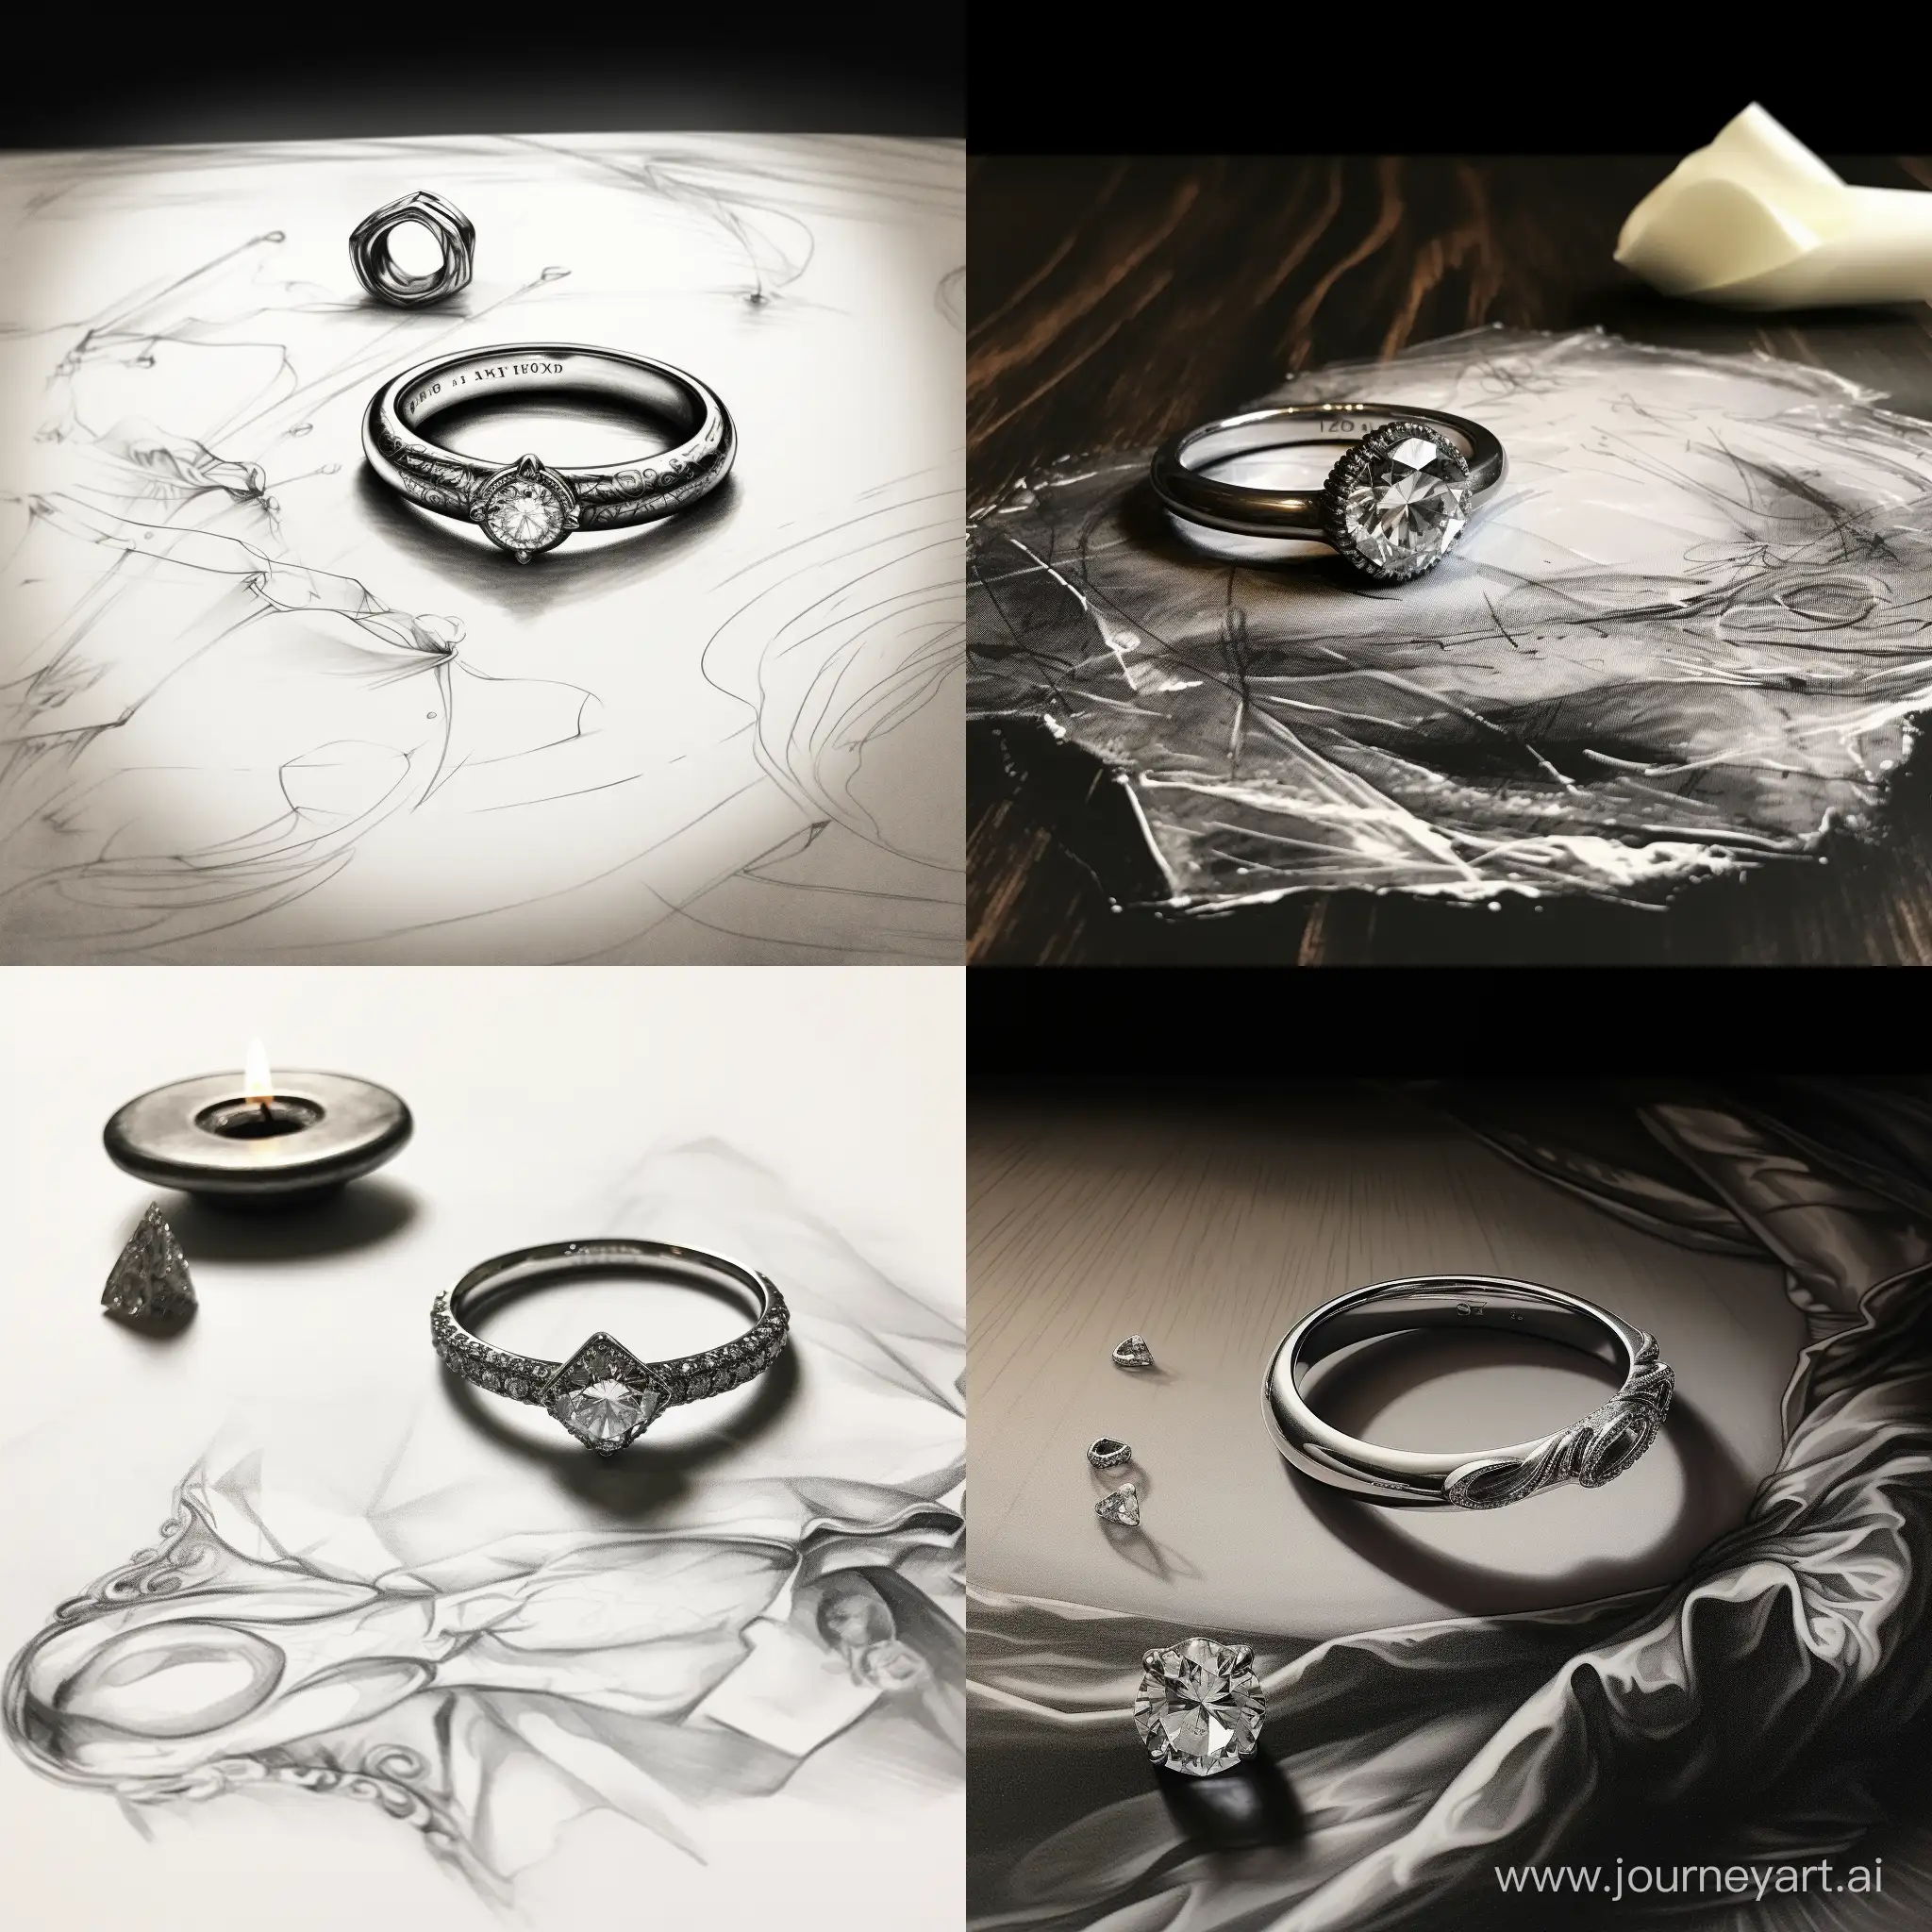 Romantic-Ambiance-Melted-Candle-Diamond-Ring-and-Ink-Masterpiece-on-Table